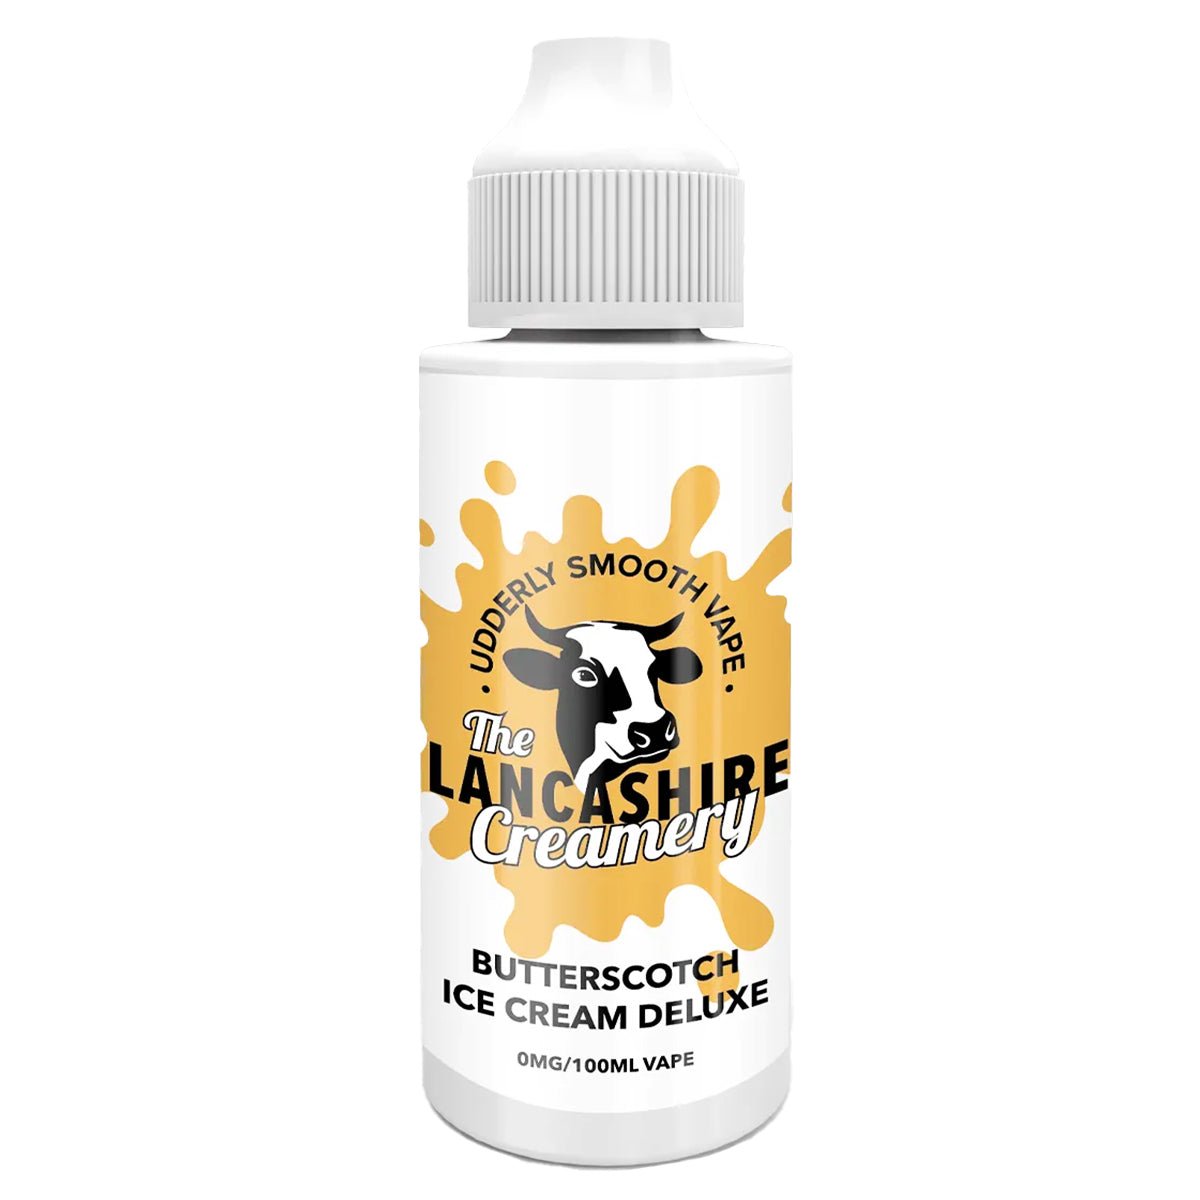 Butterscotch Ice Cream Deluxe 100ml Shortfill By The Lancashire Creamery - Prime Vapes UK